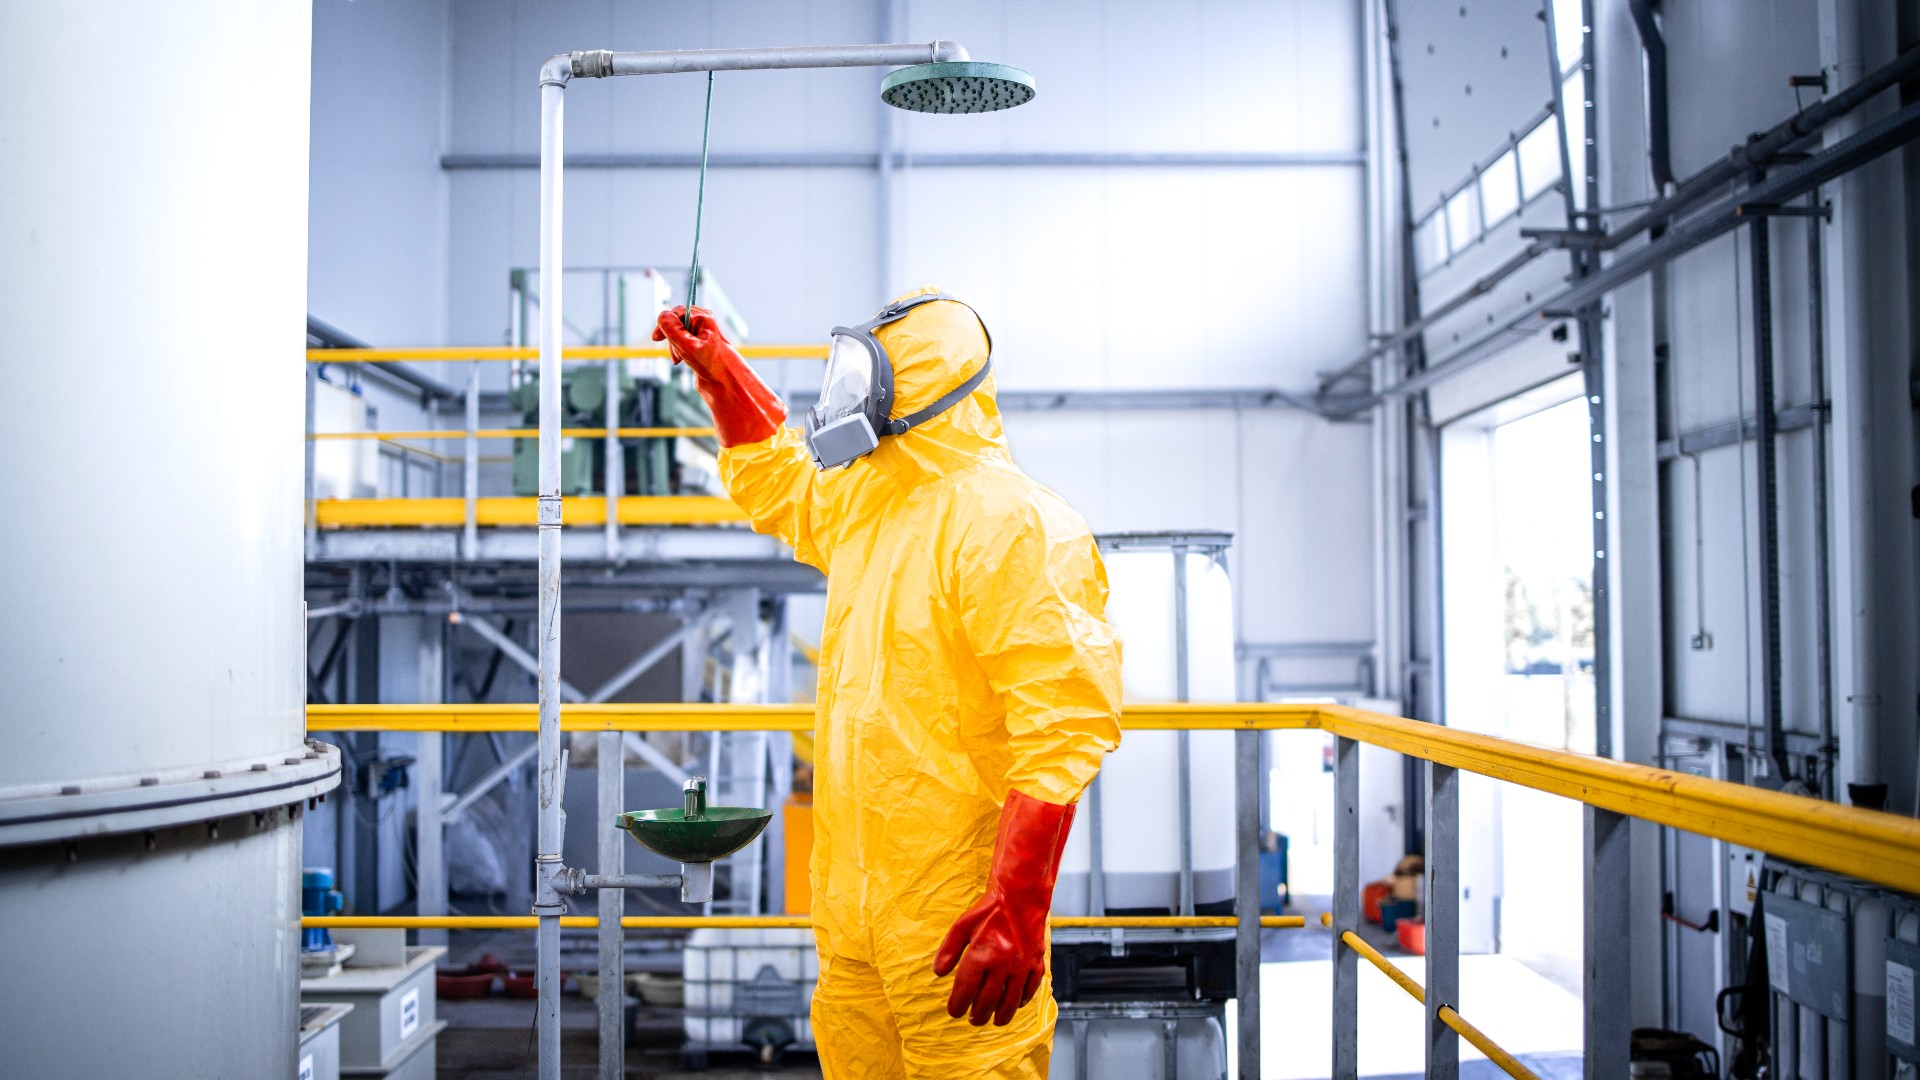 How do you decontaminate objects exposed to radioactivity?